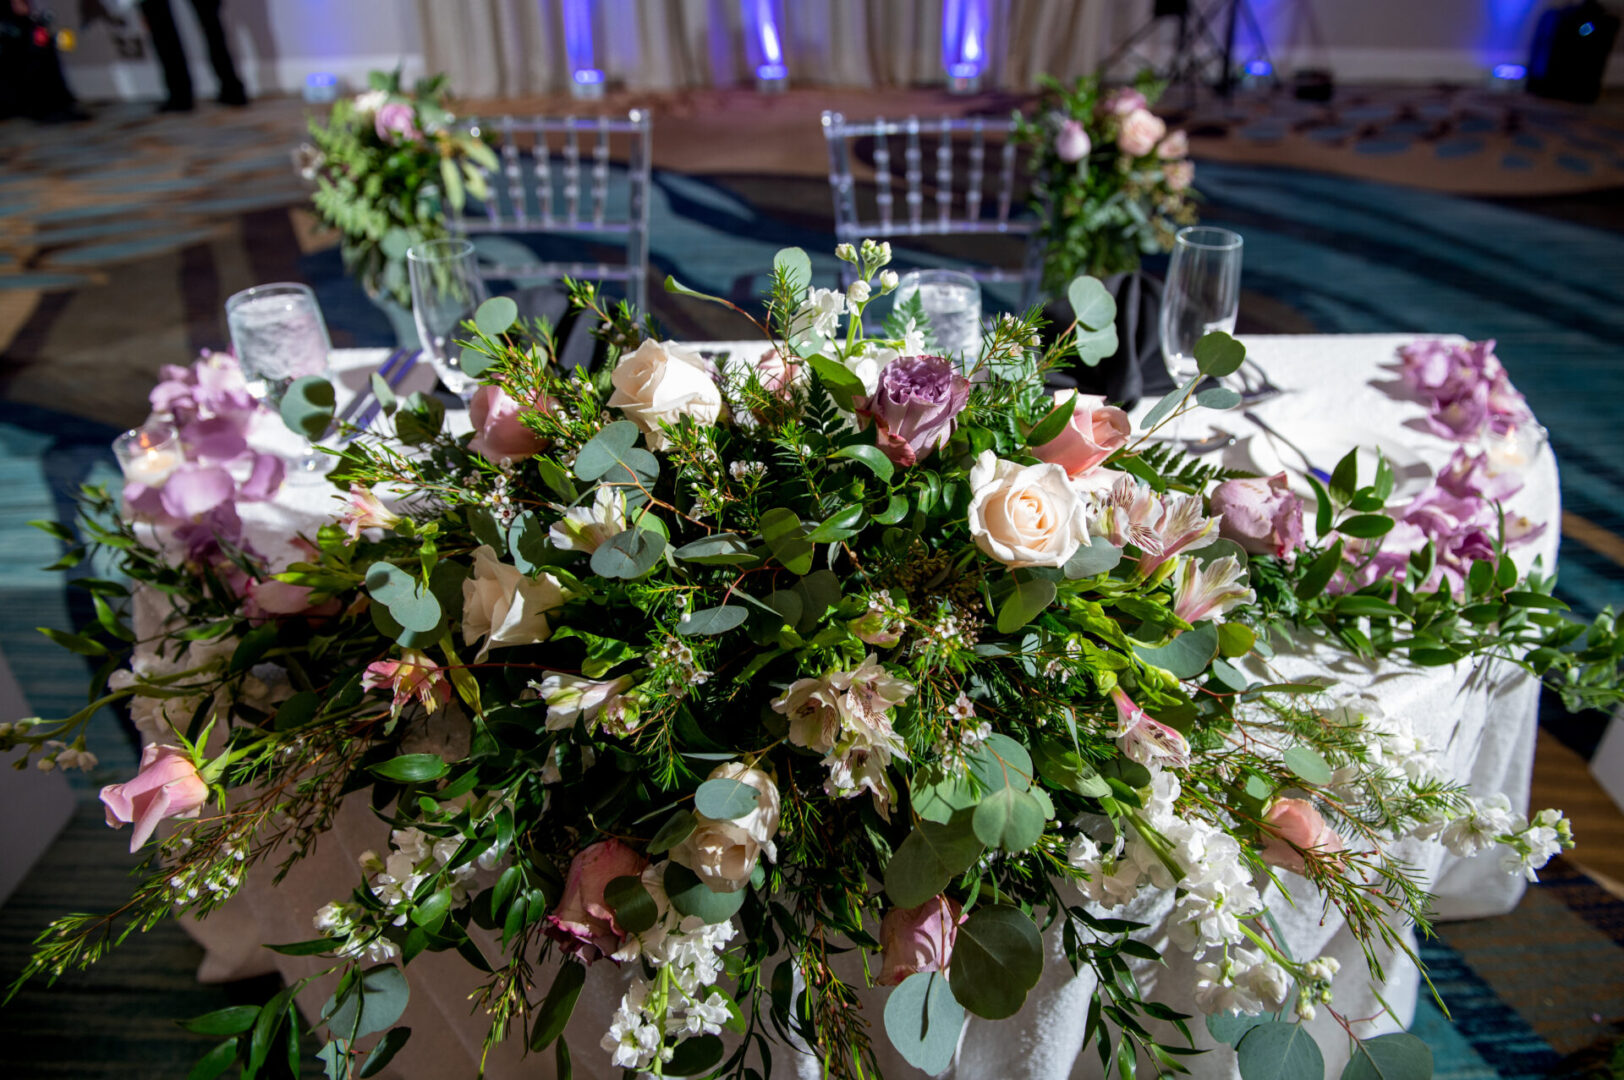 A Flower Bunch With Leaves and Flowers Placed on a Table